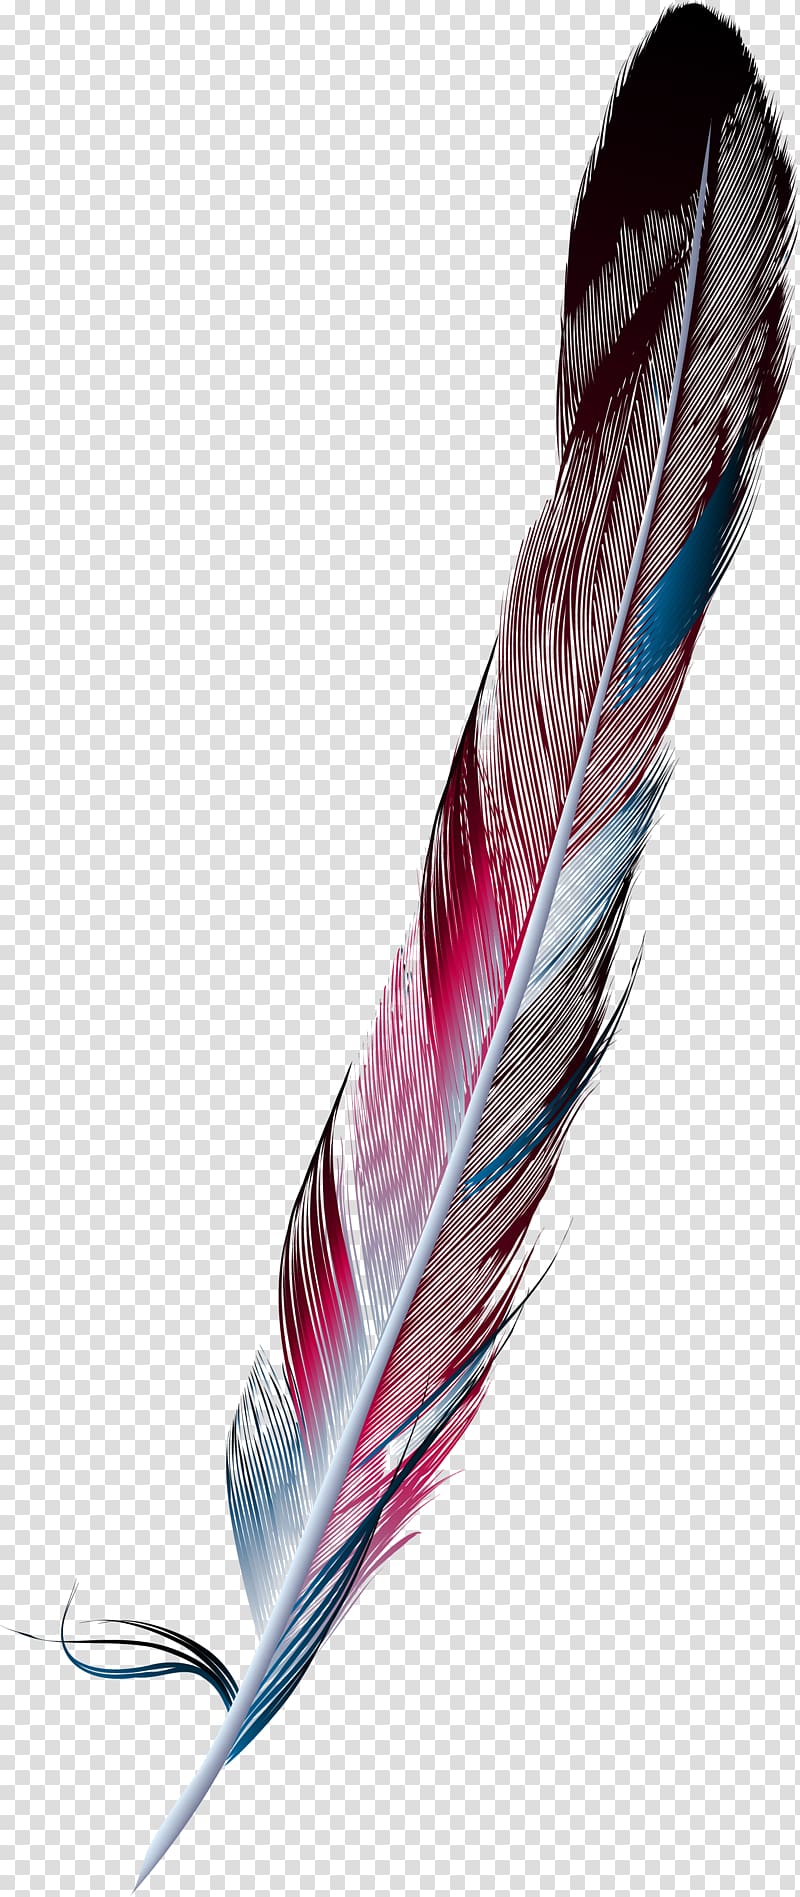 Feather Painting Drawing, Hand painted colorful feather transparent background PNG clipart